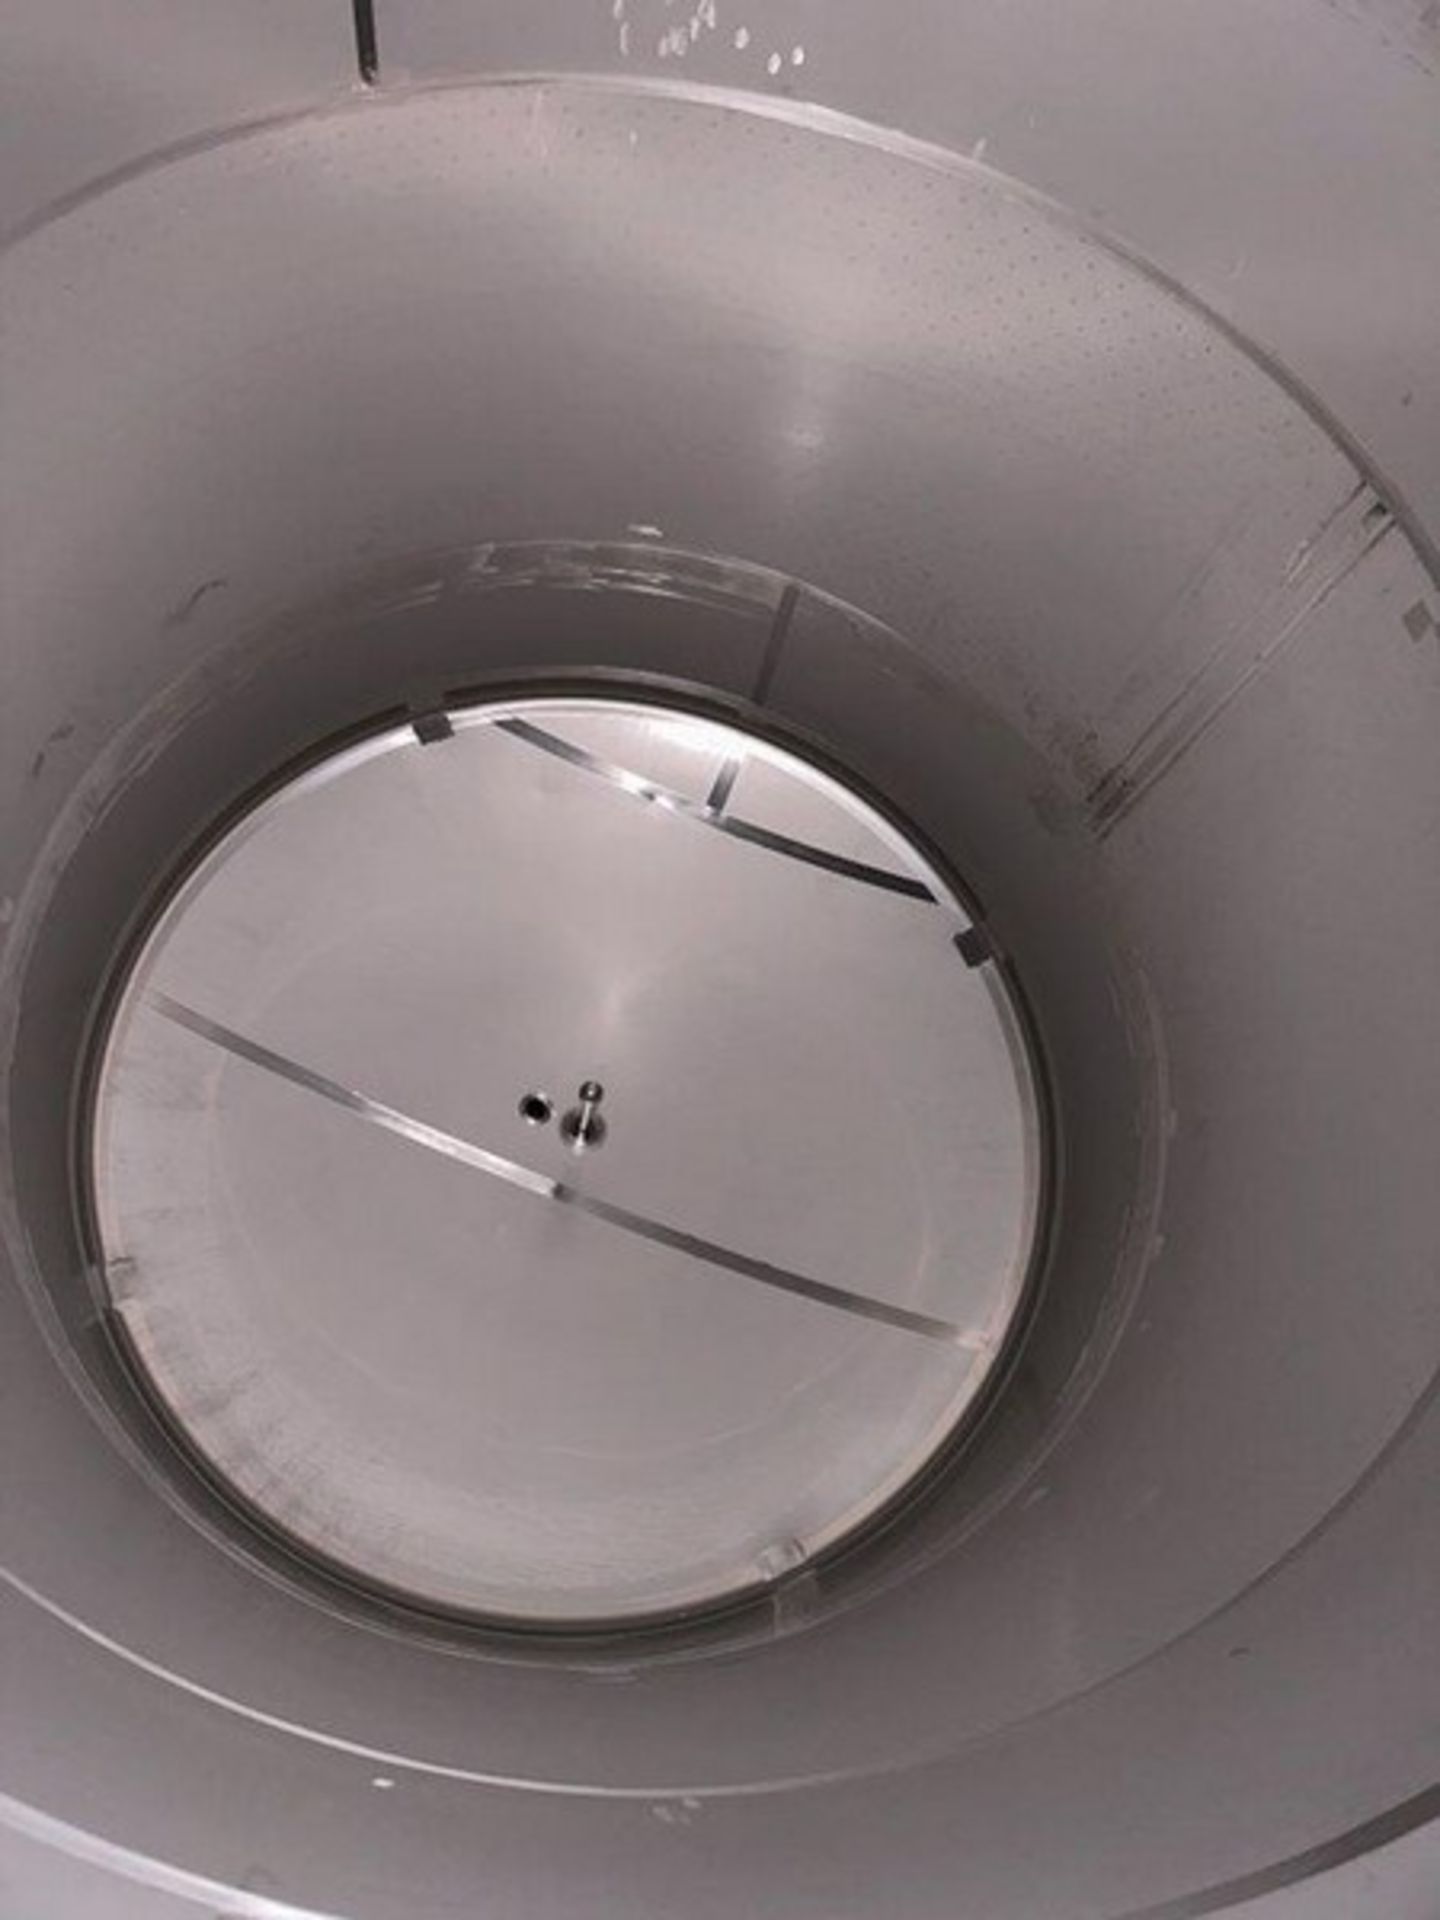 150 BBL (4650 Gallon) Vertical Cone Bottom 304 Stainless Steel Jacketed Vessel. Manufactured by Sant - Image 5 of 7